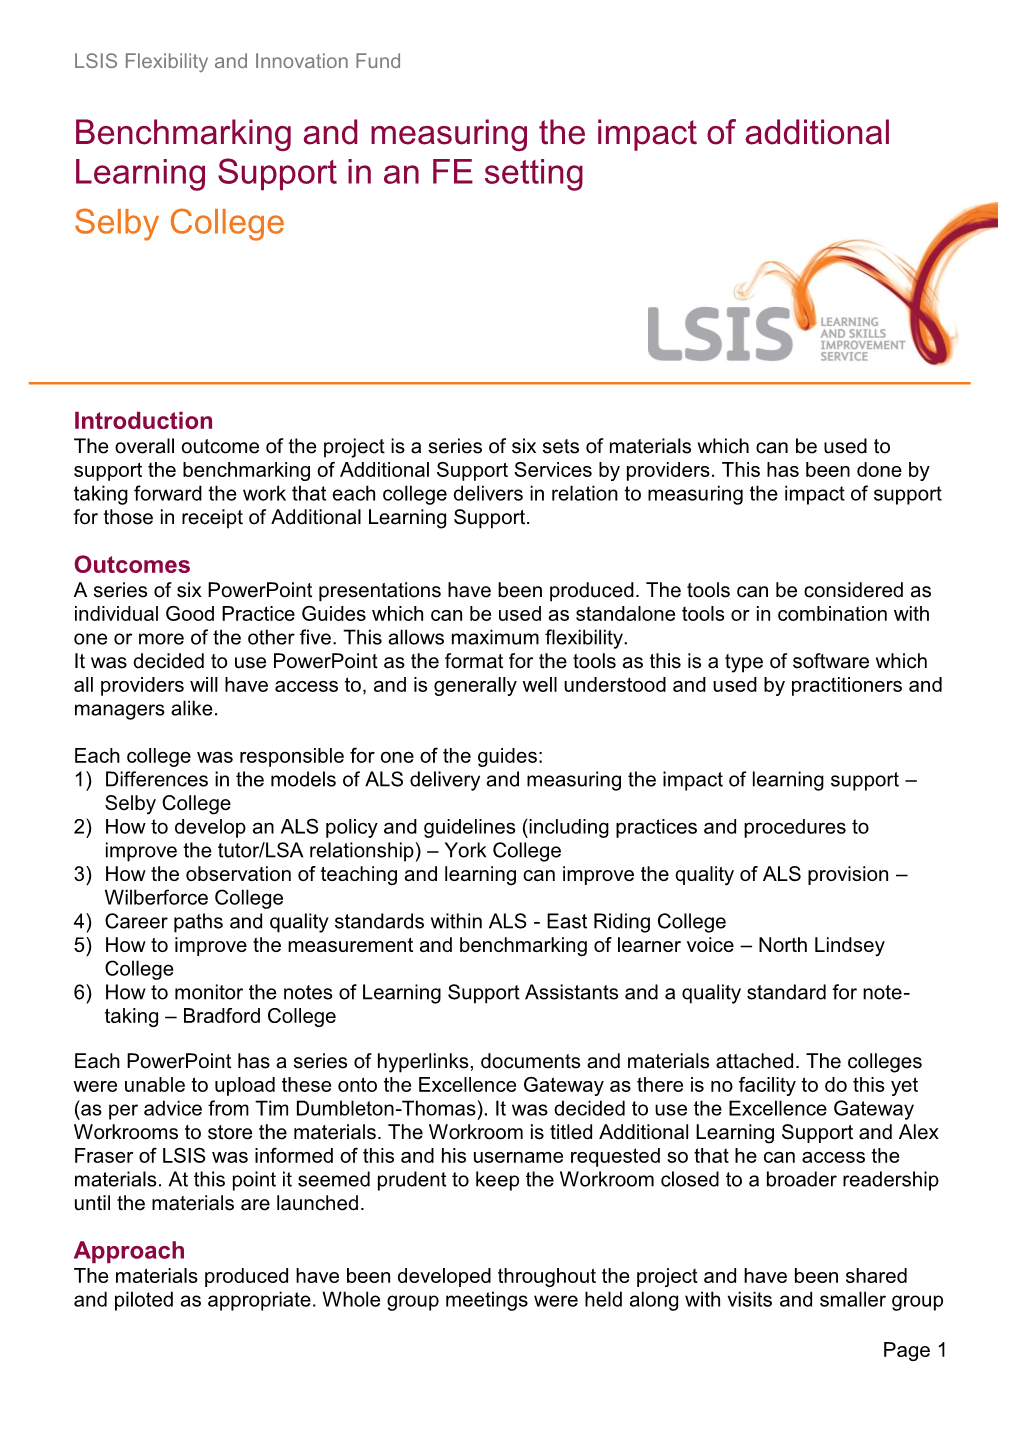 Benchmarking and Measuring the Impact of Additional Learning Support in an FE Setting Selby College